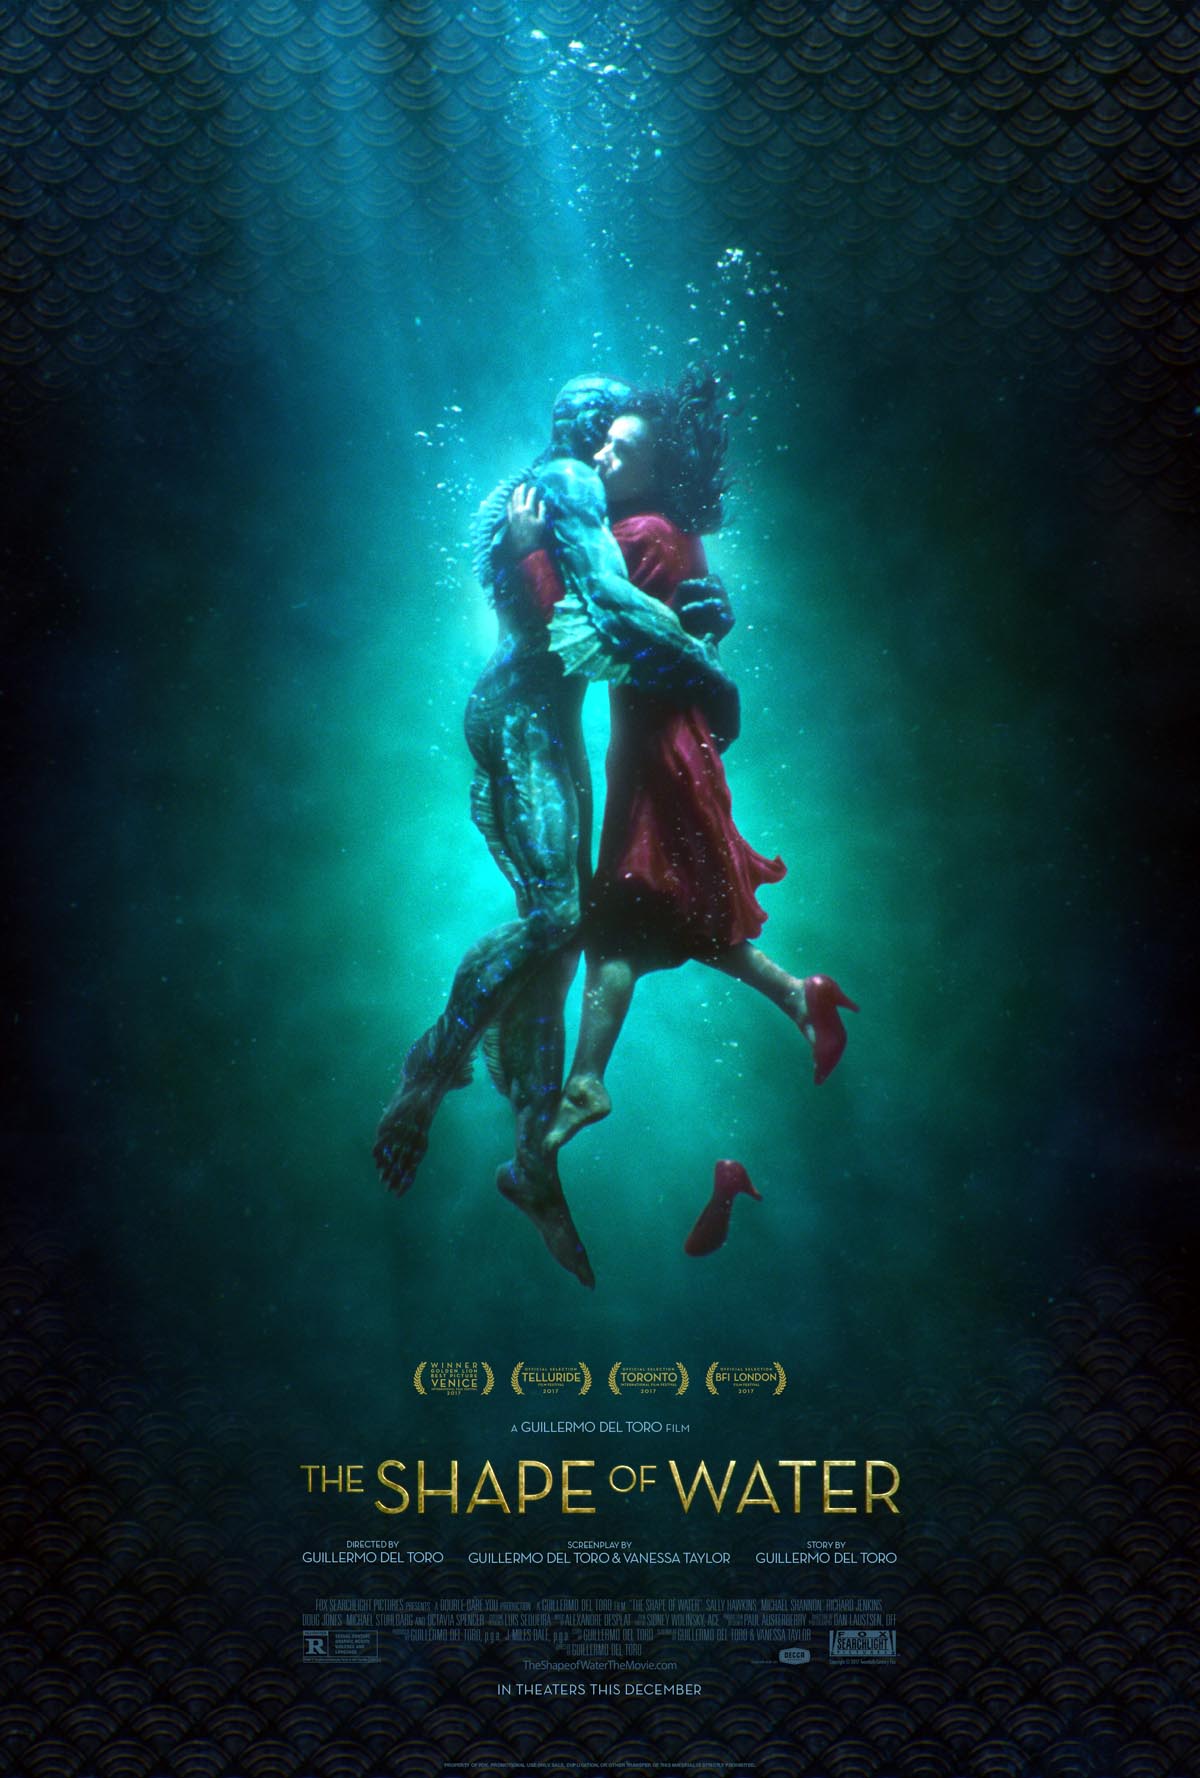 shape of water vfx movie poster